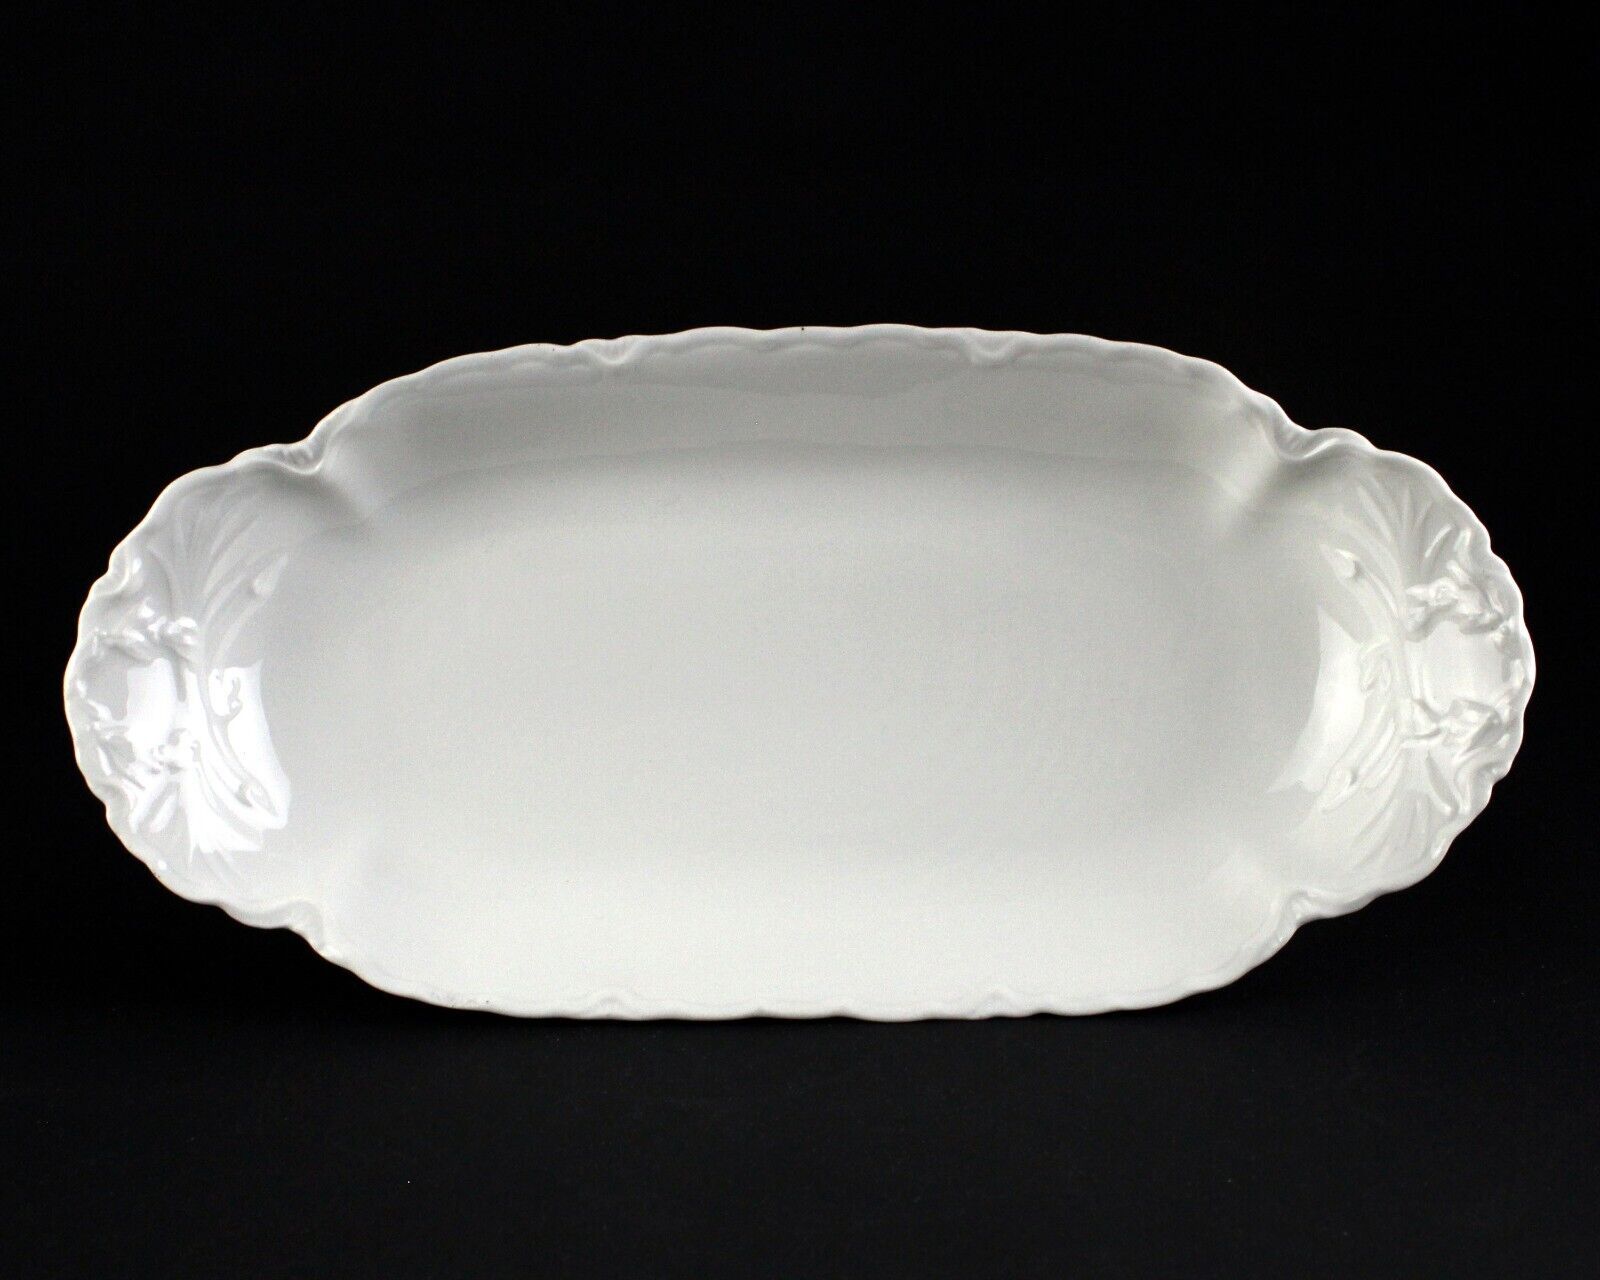 Primary image for Haviland Limoges Ranson All White Celery Tray, Antique France Oval 11 3/4"